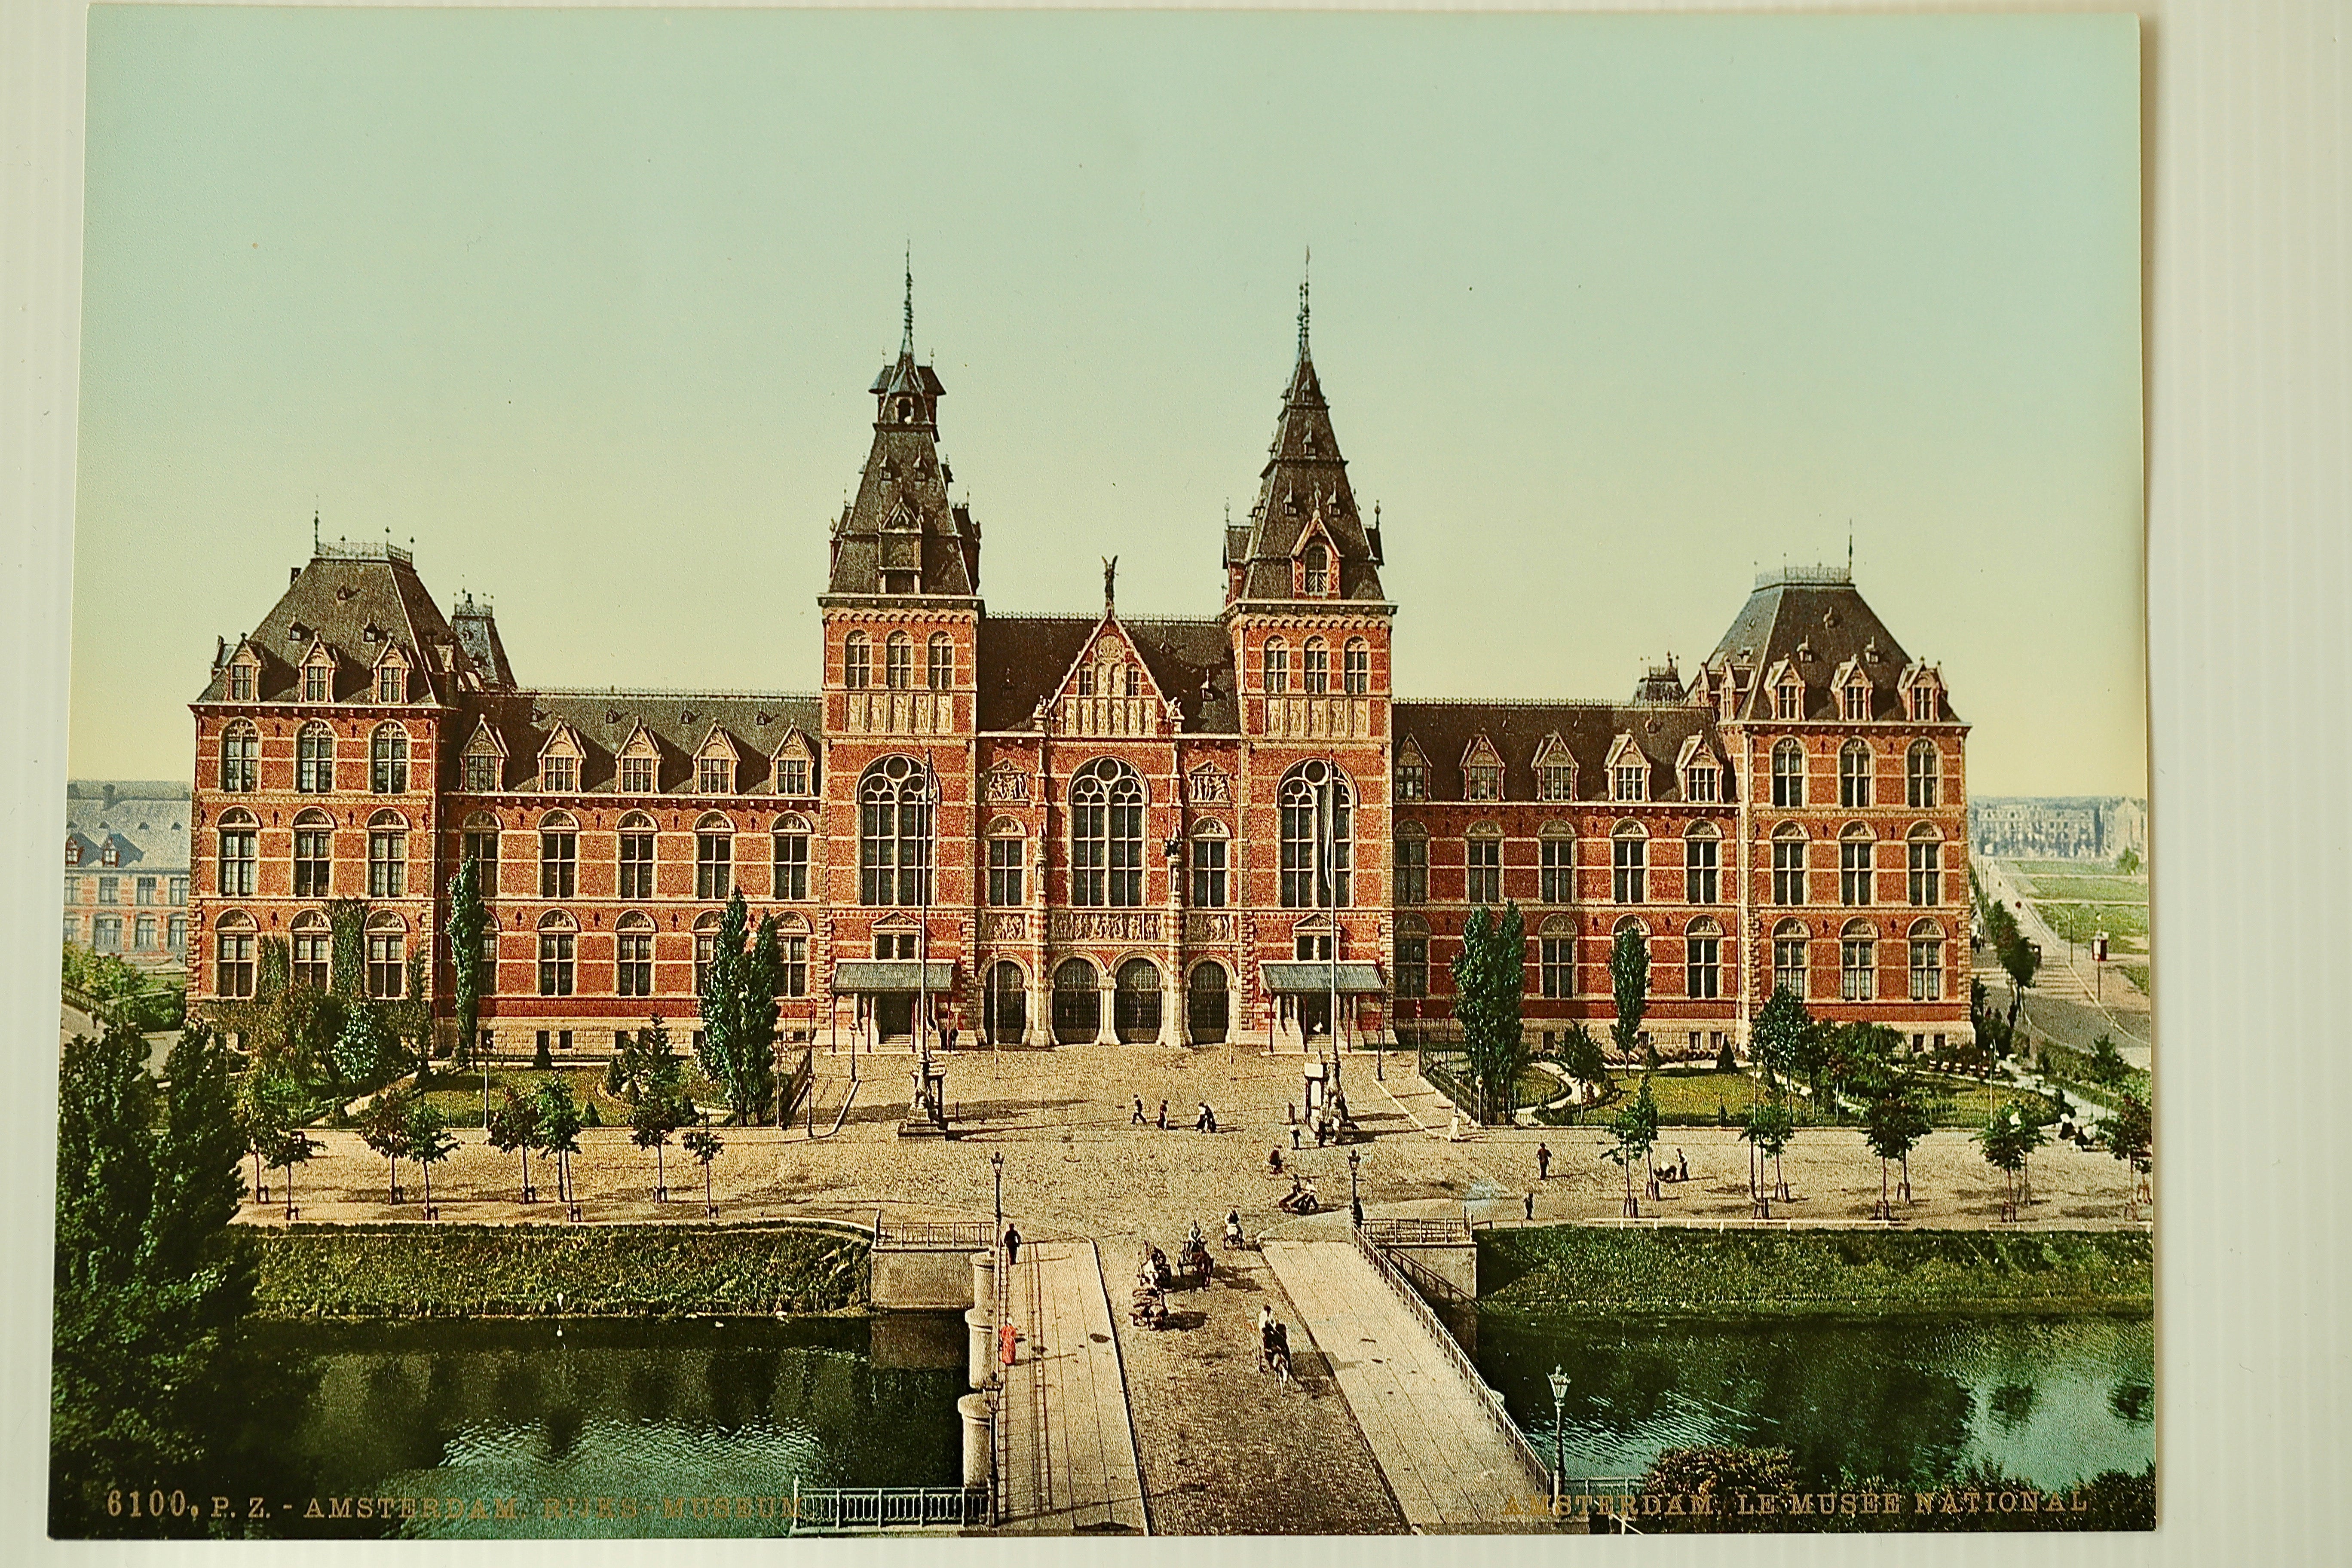 LITHOGRAPHIC PHOTOPRINT FROM 1896, RIJKSMUSEUM AMSTERDAM